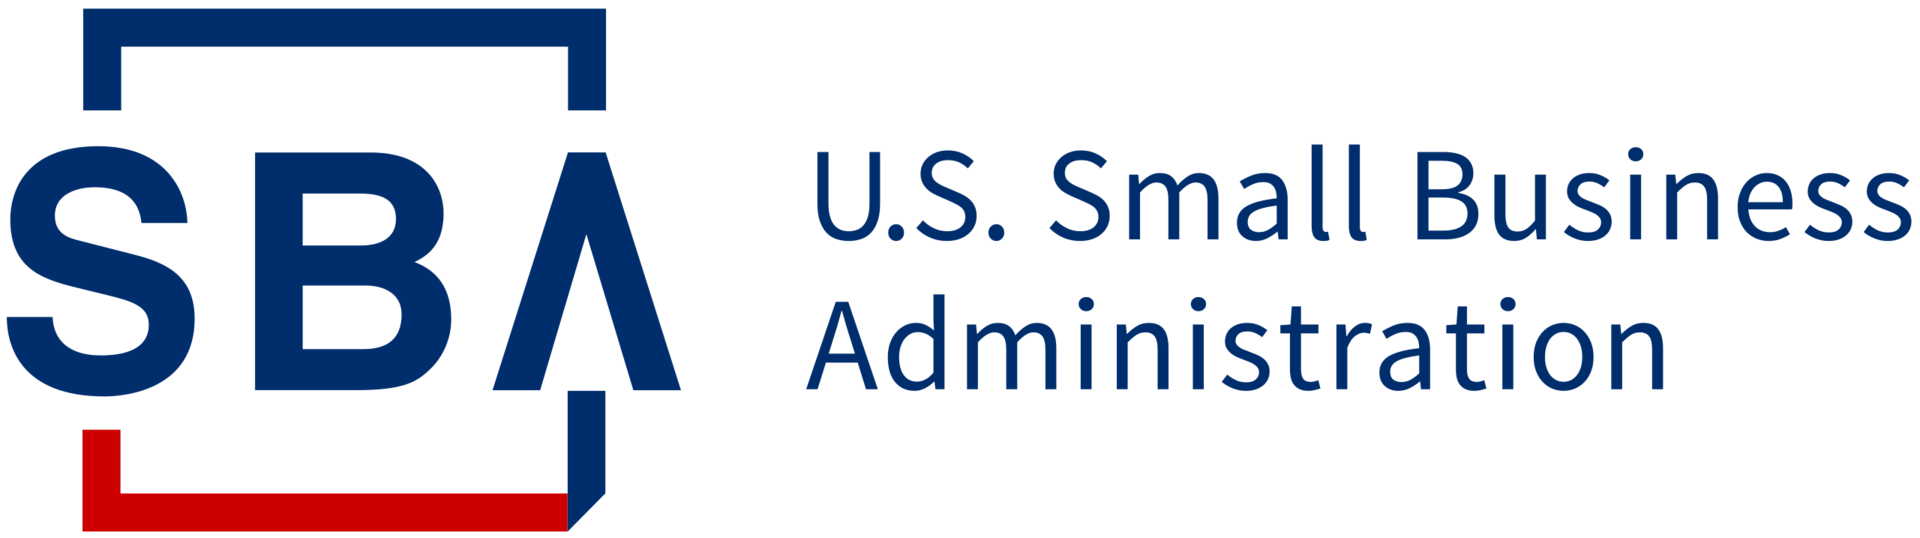 2560px-U.S._Small_Business_Administration_logo.svg_.png